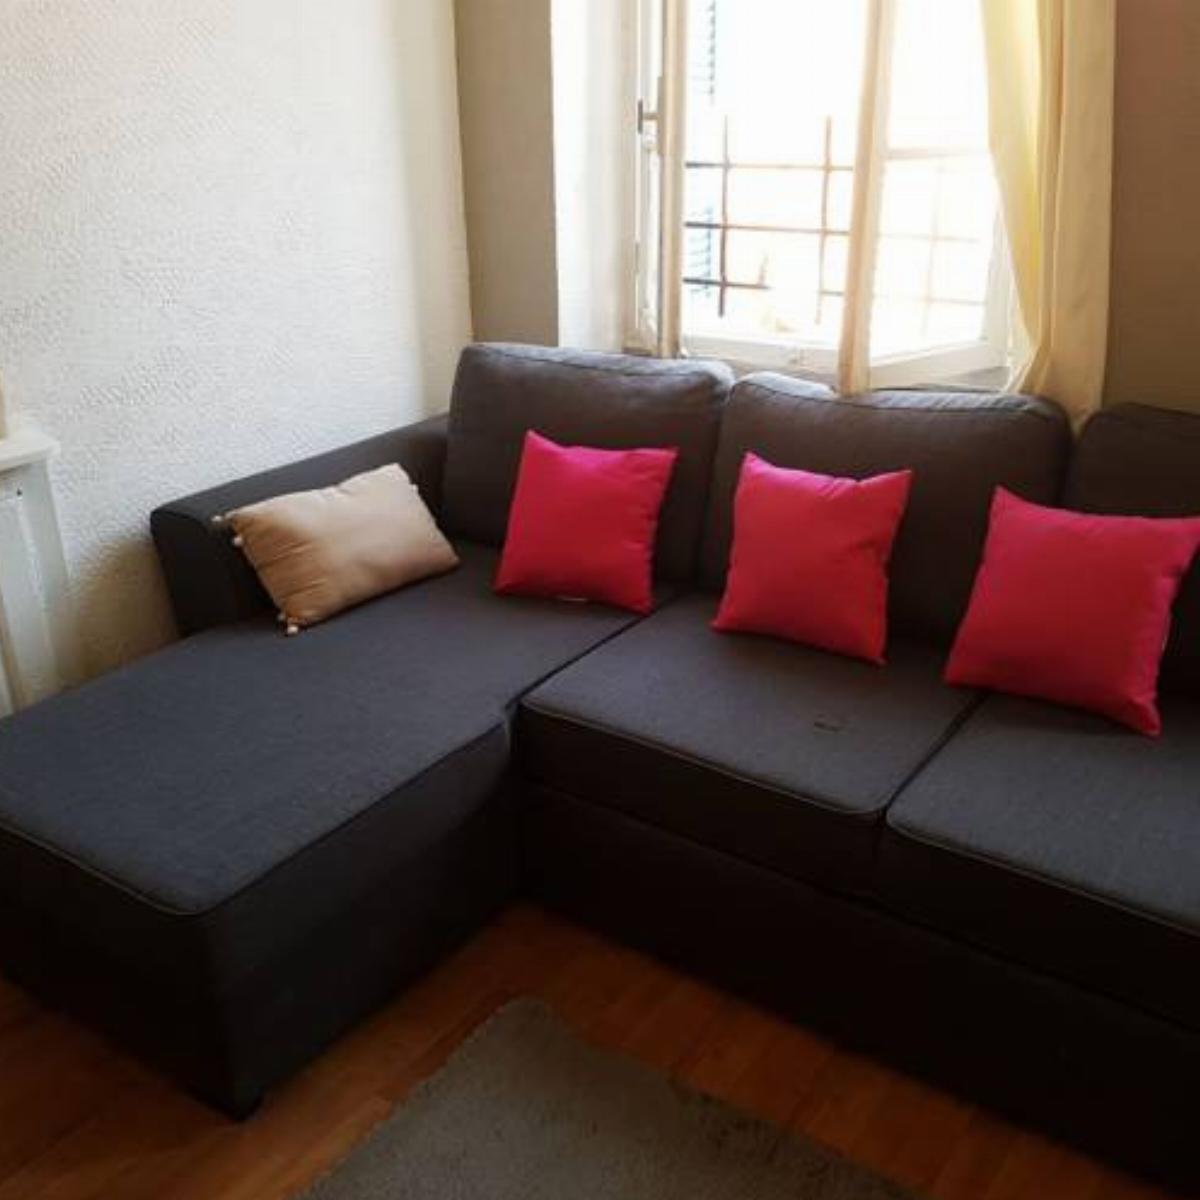 **** VERY CENTRAL Ajaccio 36 rue Fesch, cosy flat in city center pedestrian street, up to 4 people * Hotel Ajaccio France